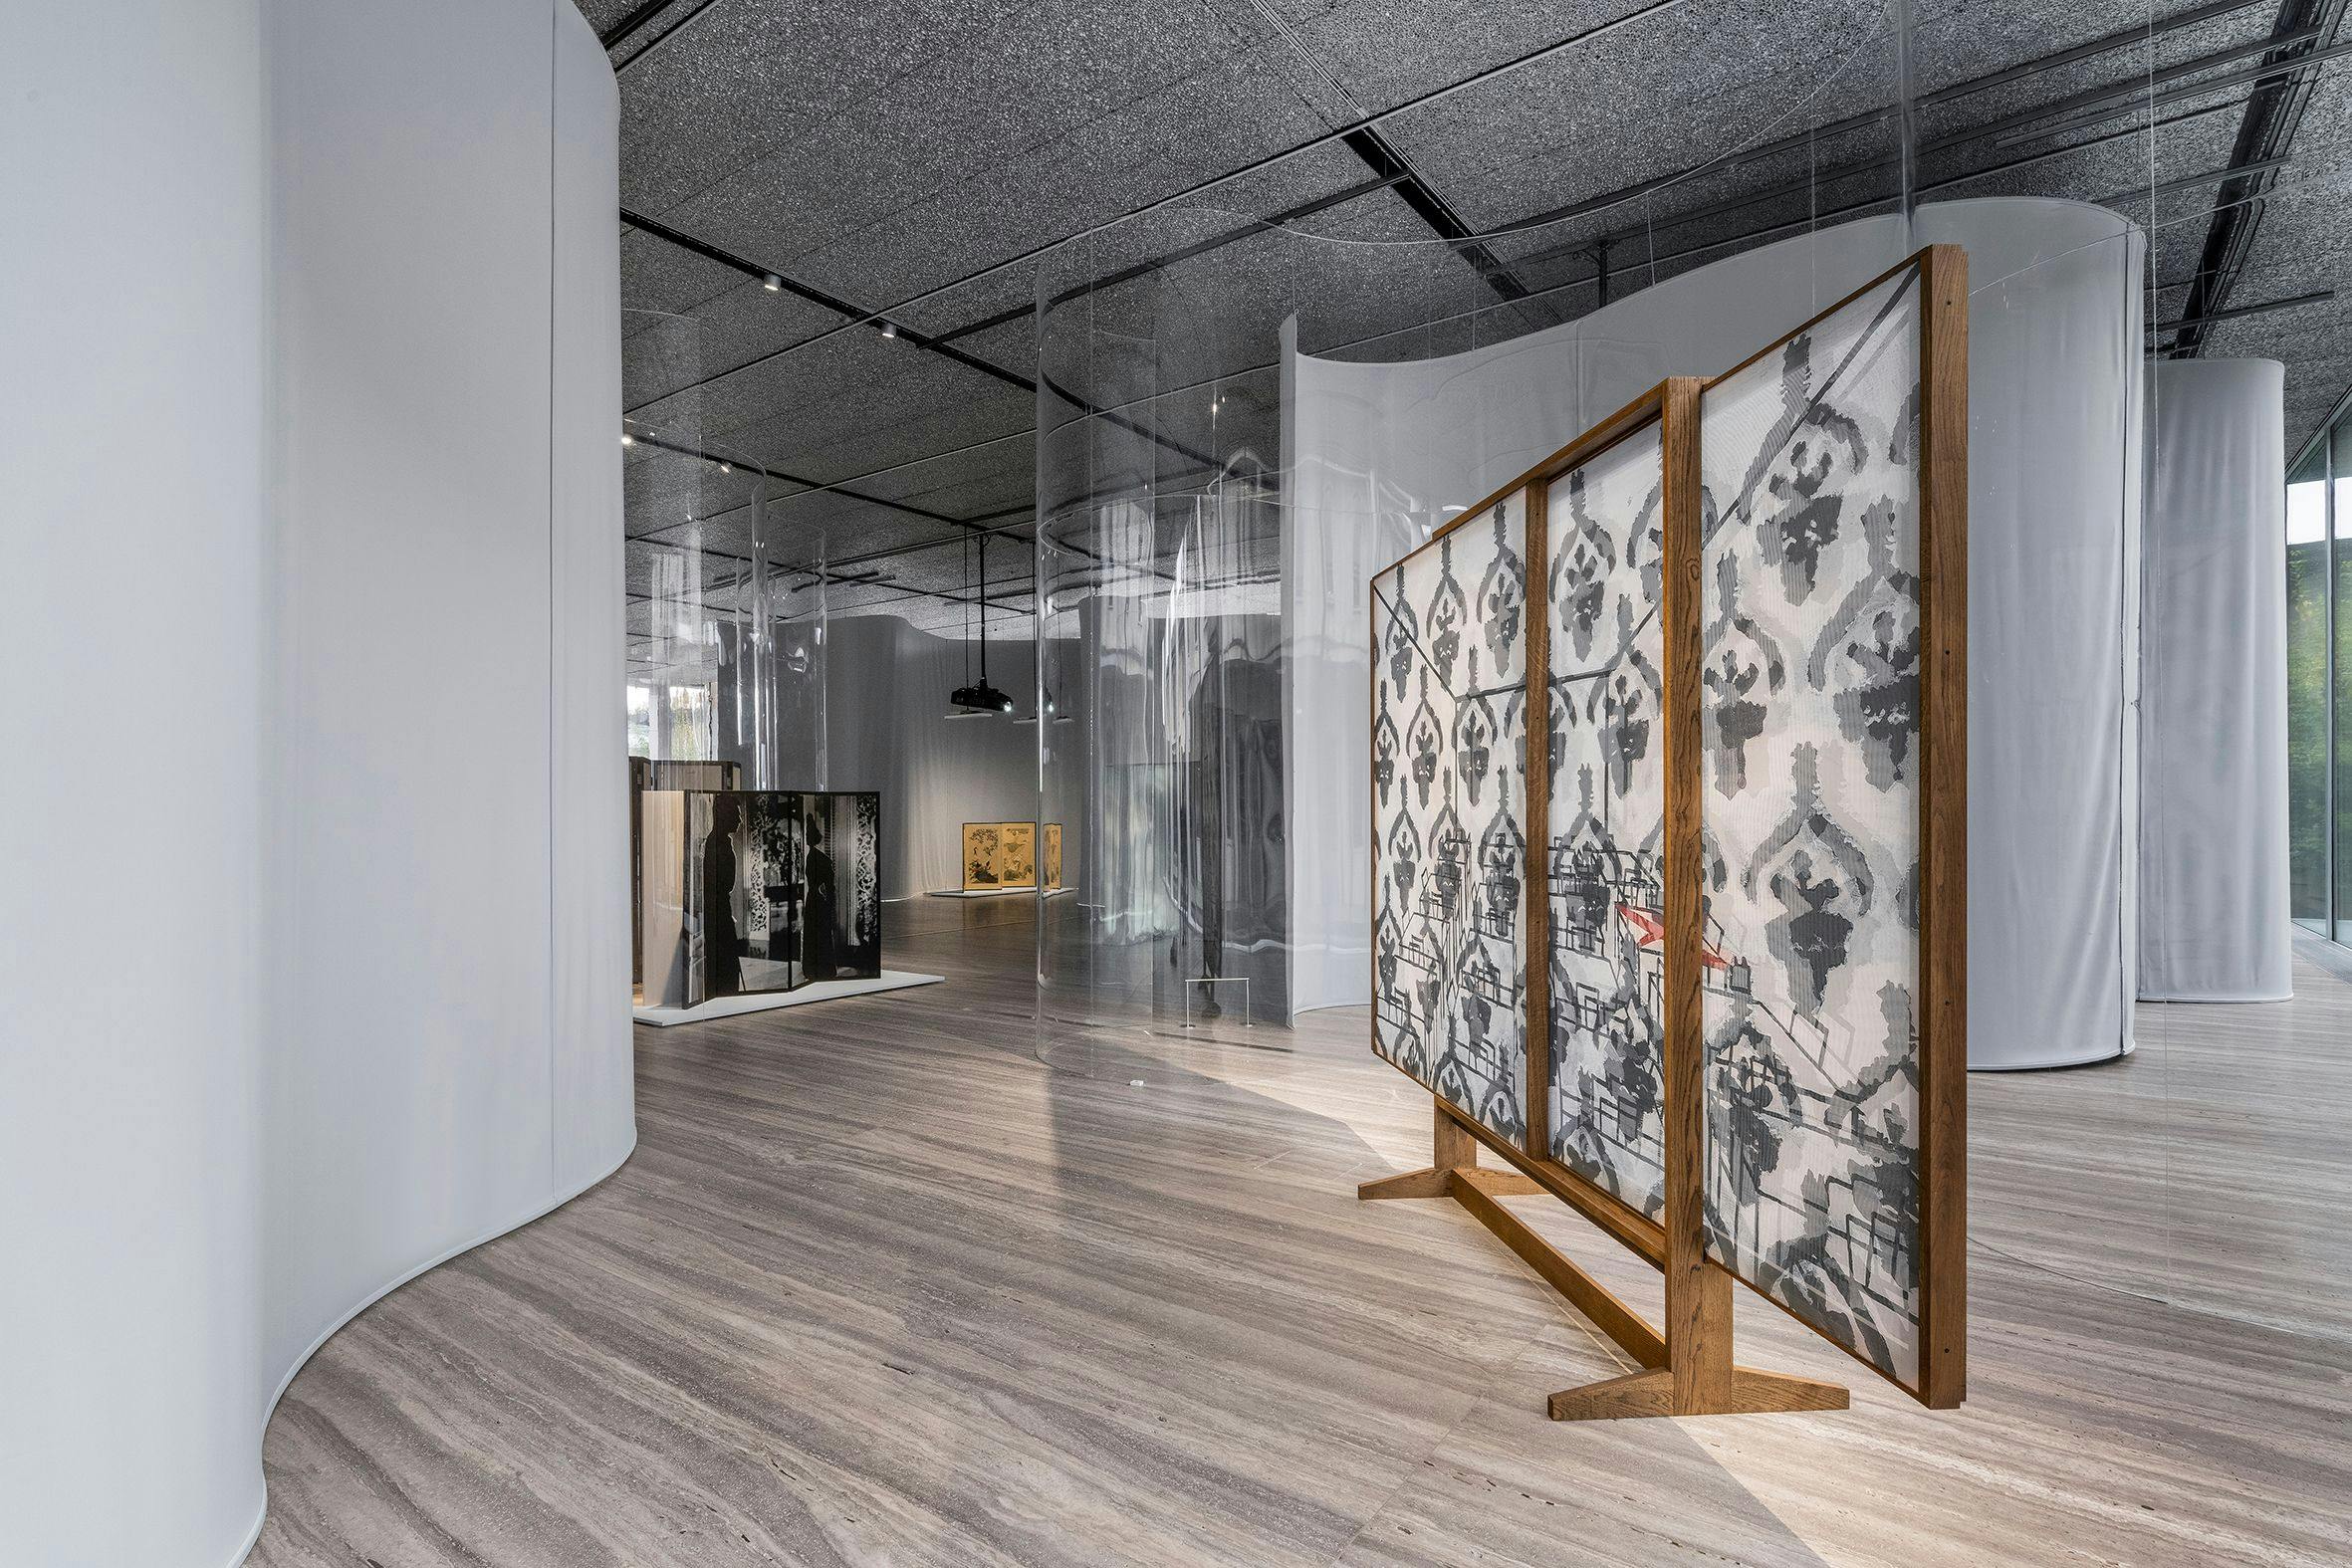 Installation view of the exhibition, Paraventi: Folding Screens from the 17th to 21st Centuries, at Fondazione Prada, in Milan, dated 2023.